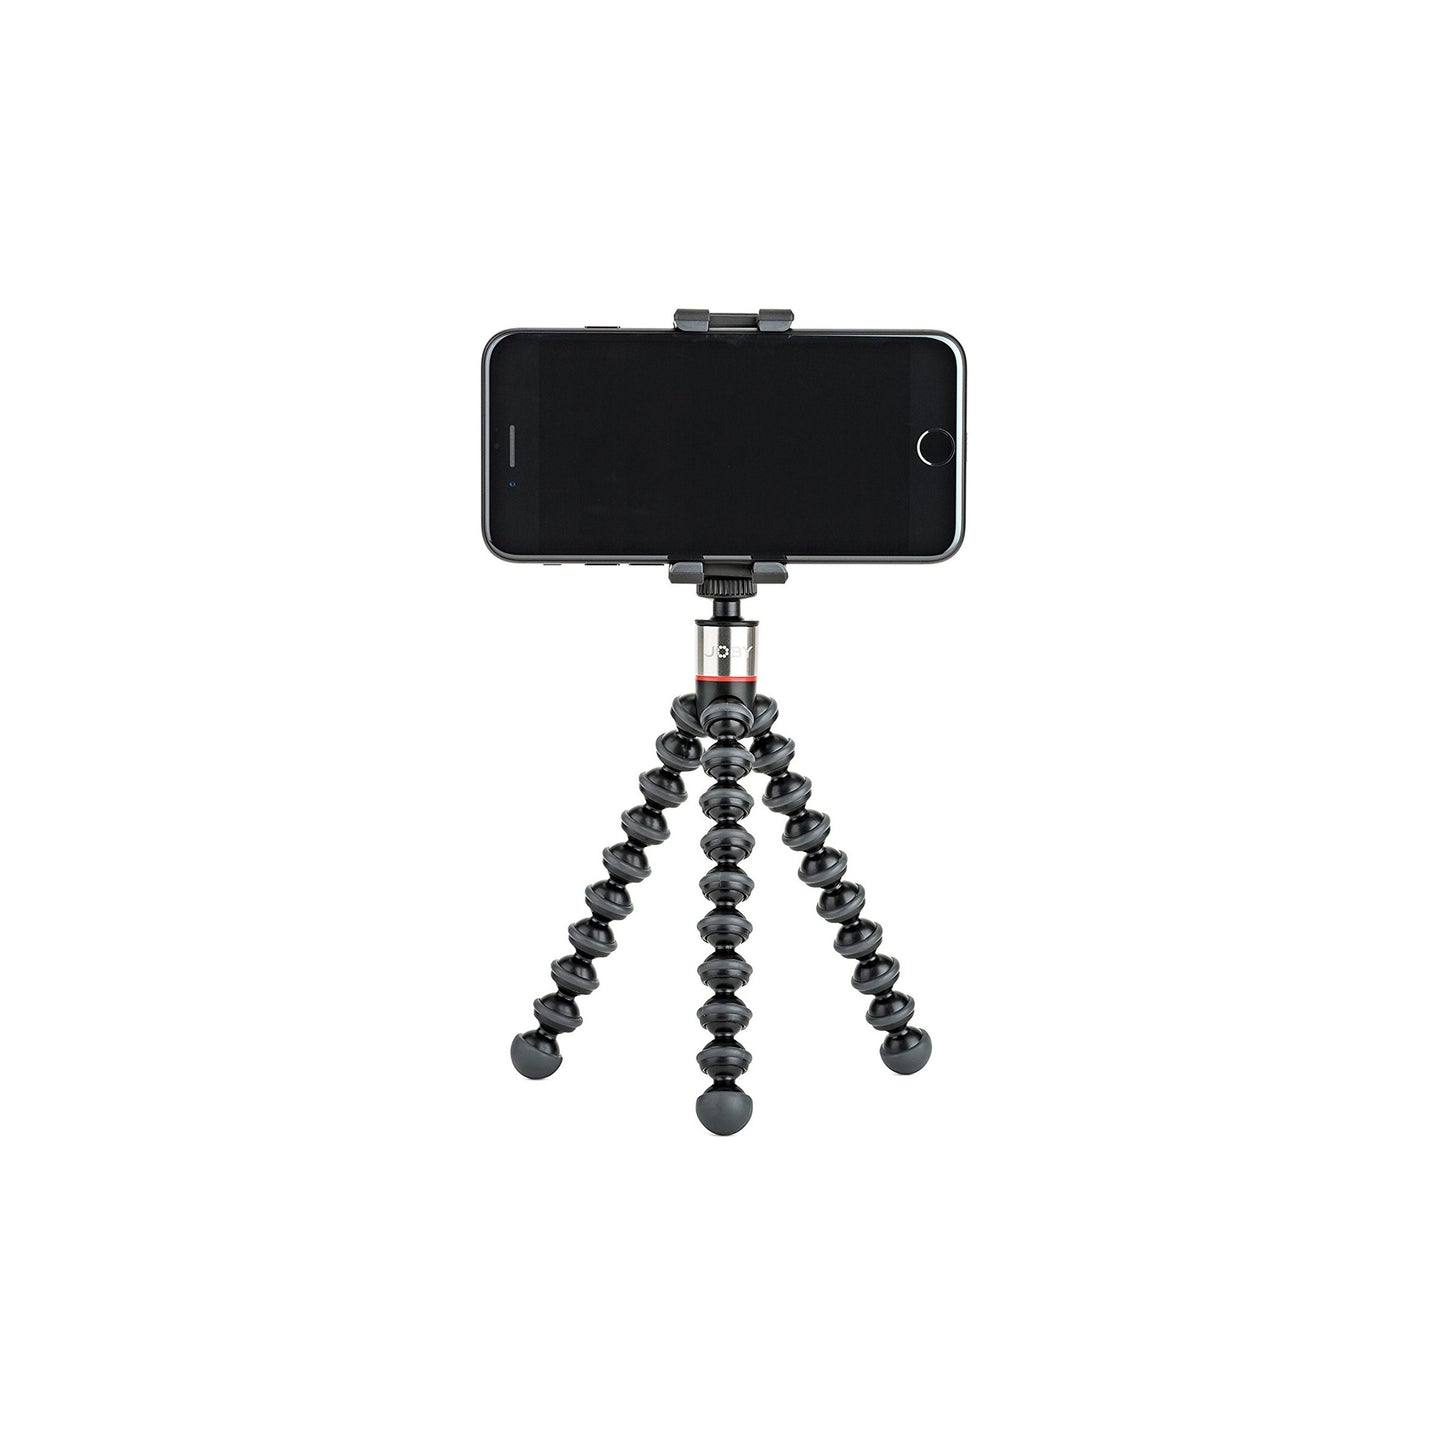 Stand for cameras and smartphones from JOBY